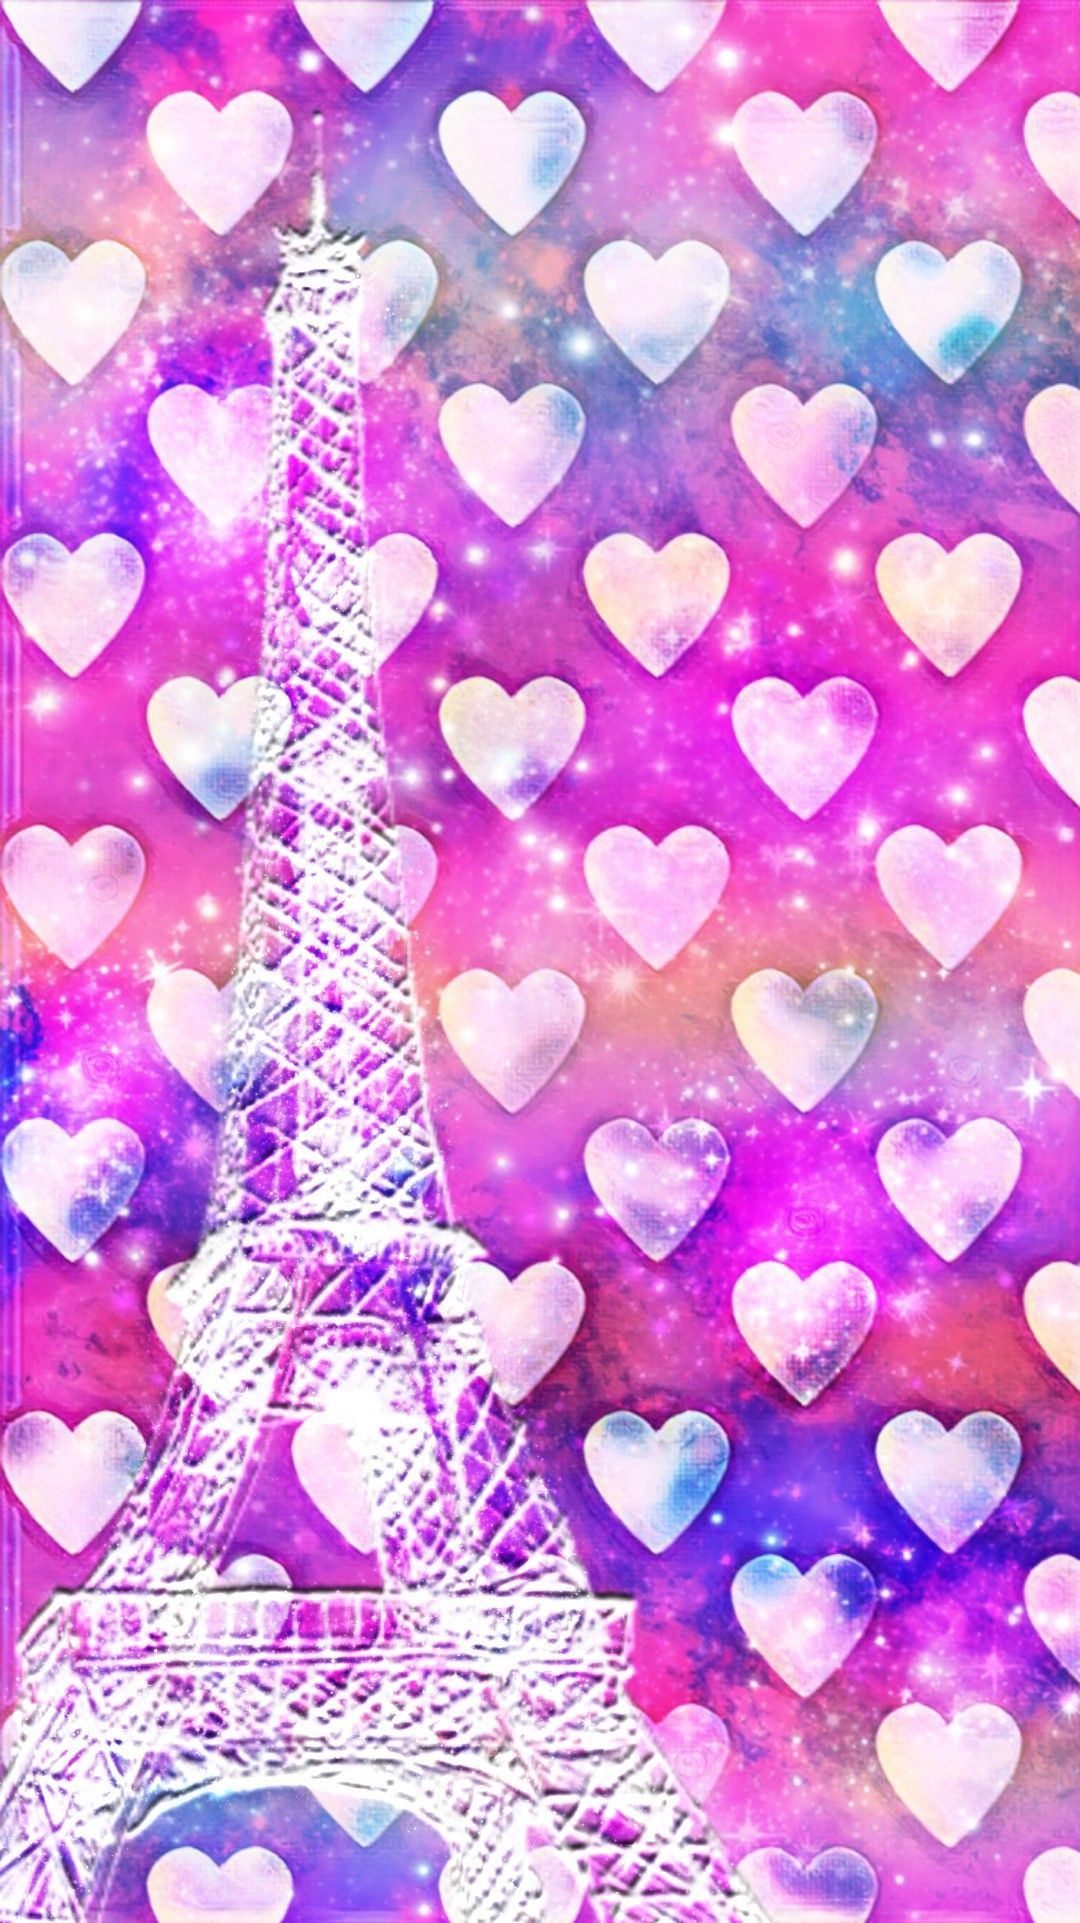 Lovely Hearts Paris, made by me #patterns #colorful #glitter #background # wallpaper #sparkles #glitter. Rainbow wallpaper, Glitter background, Glitter wallpaper